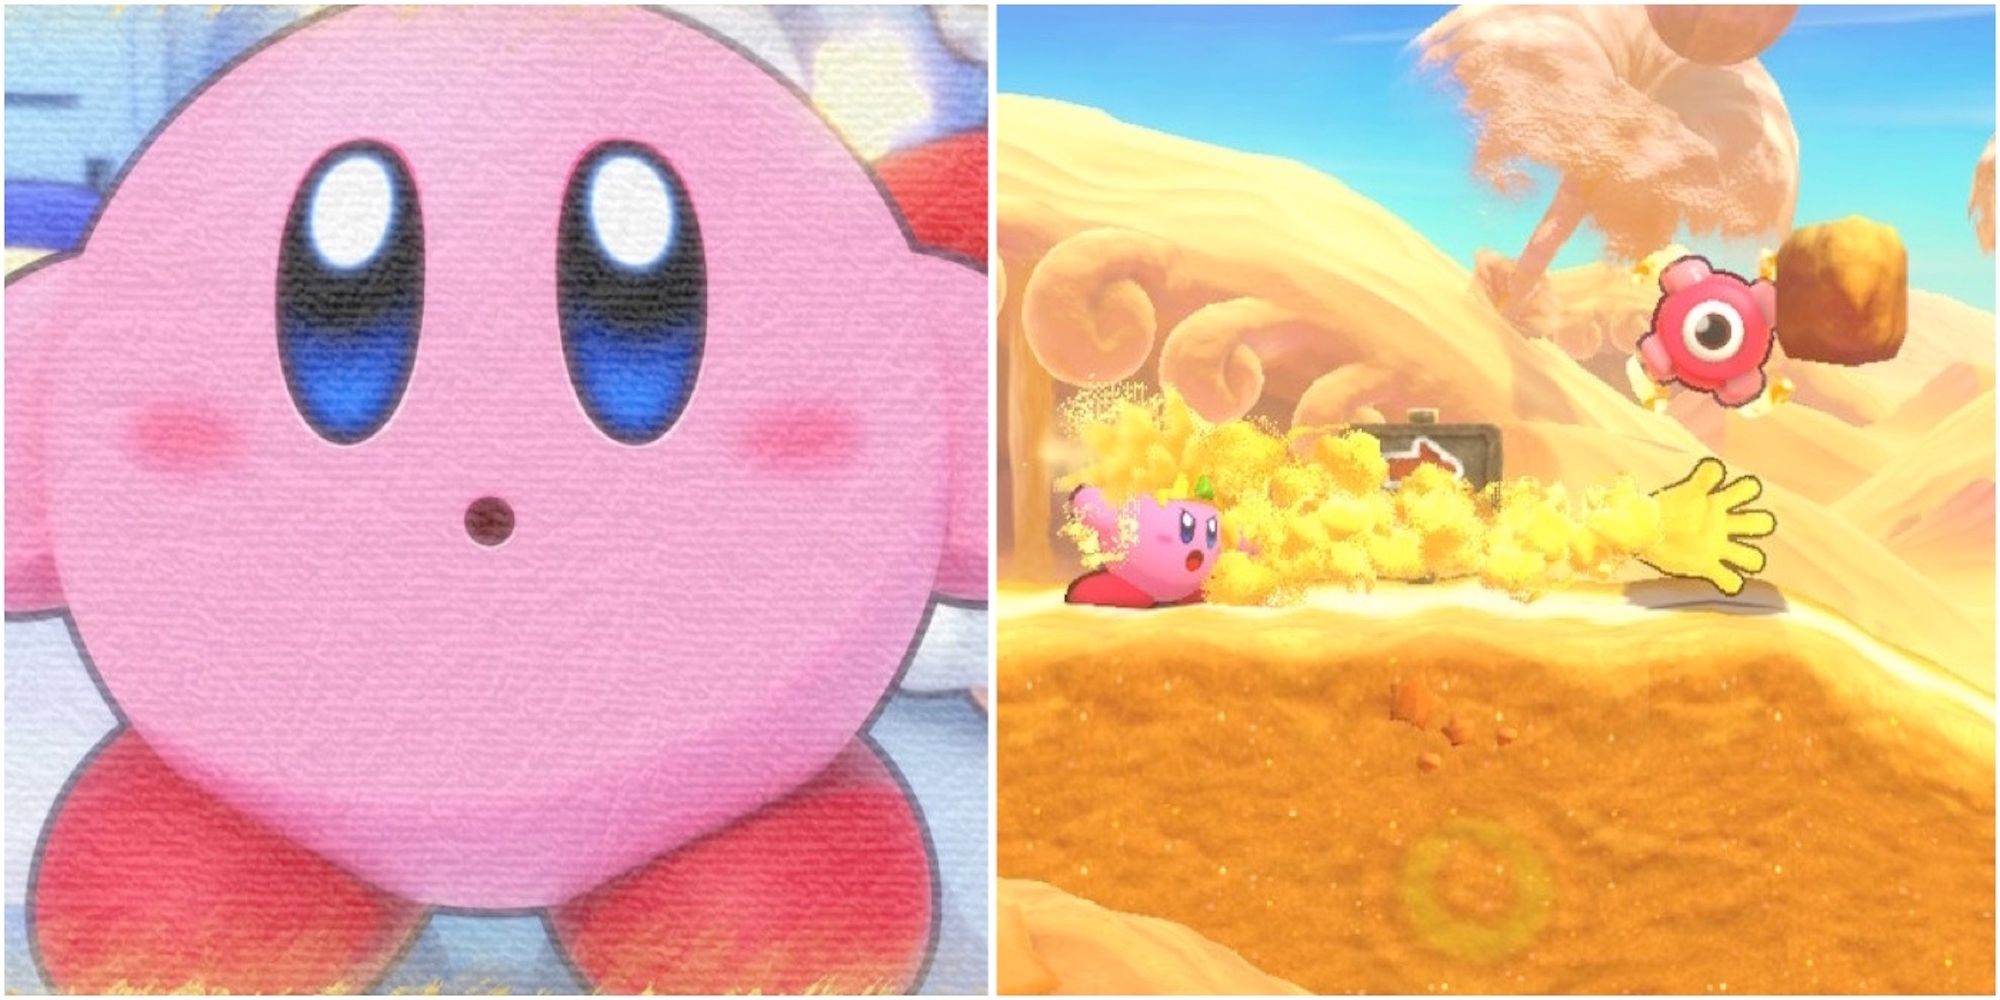 Kirby and fighting enemies in Kirby's Return to Dream Land Deluxe